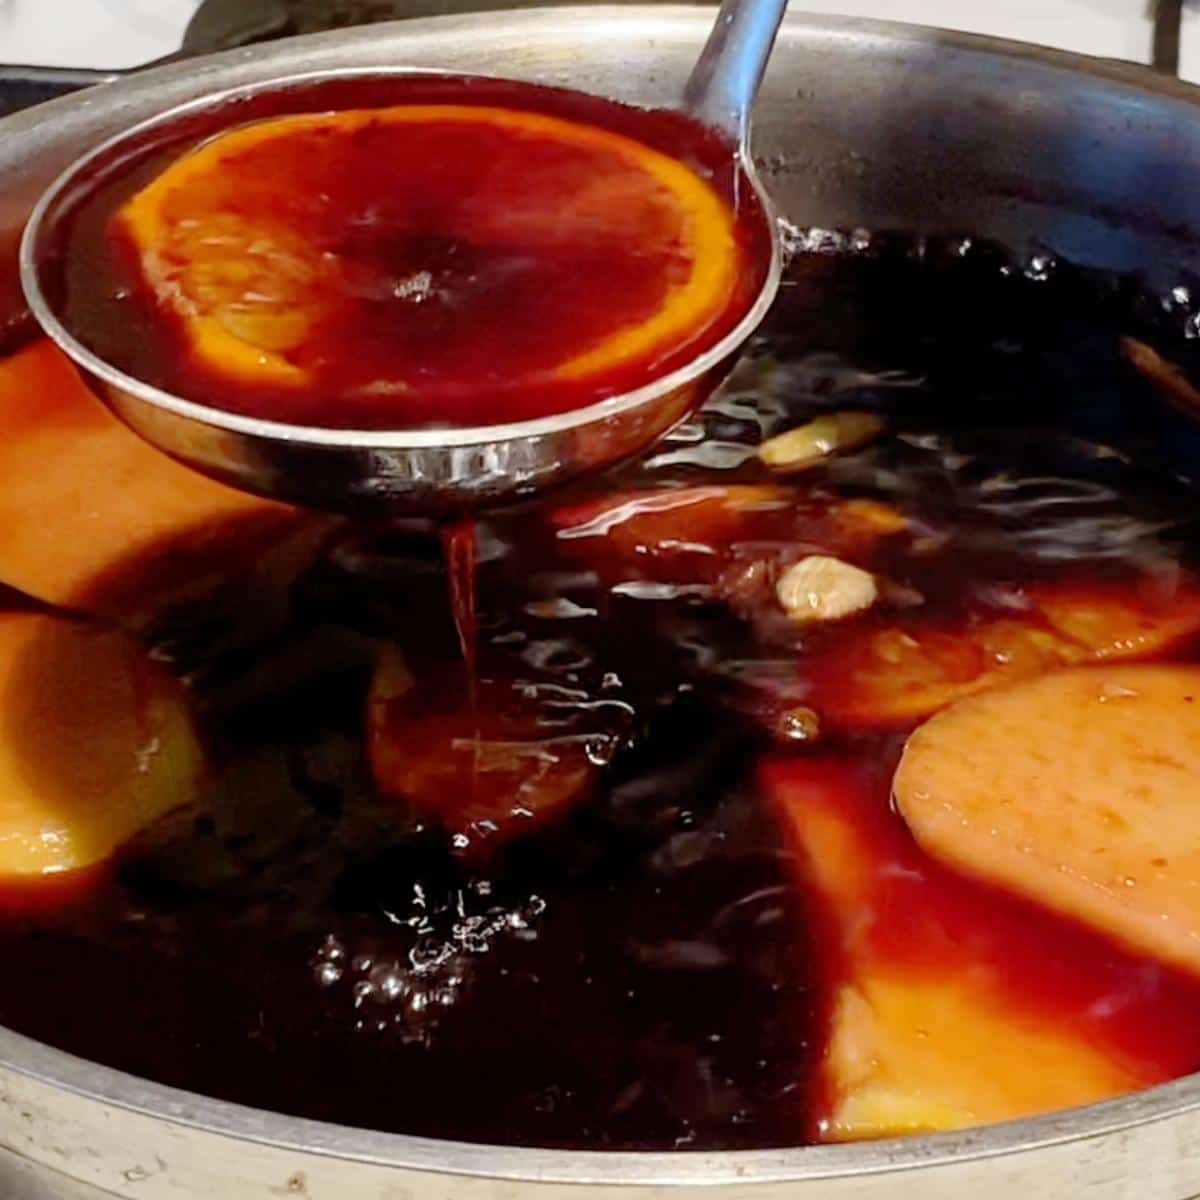 A saucepan with red wine mulled in spices.